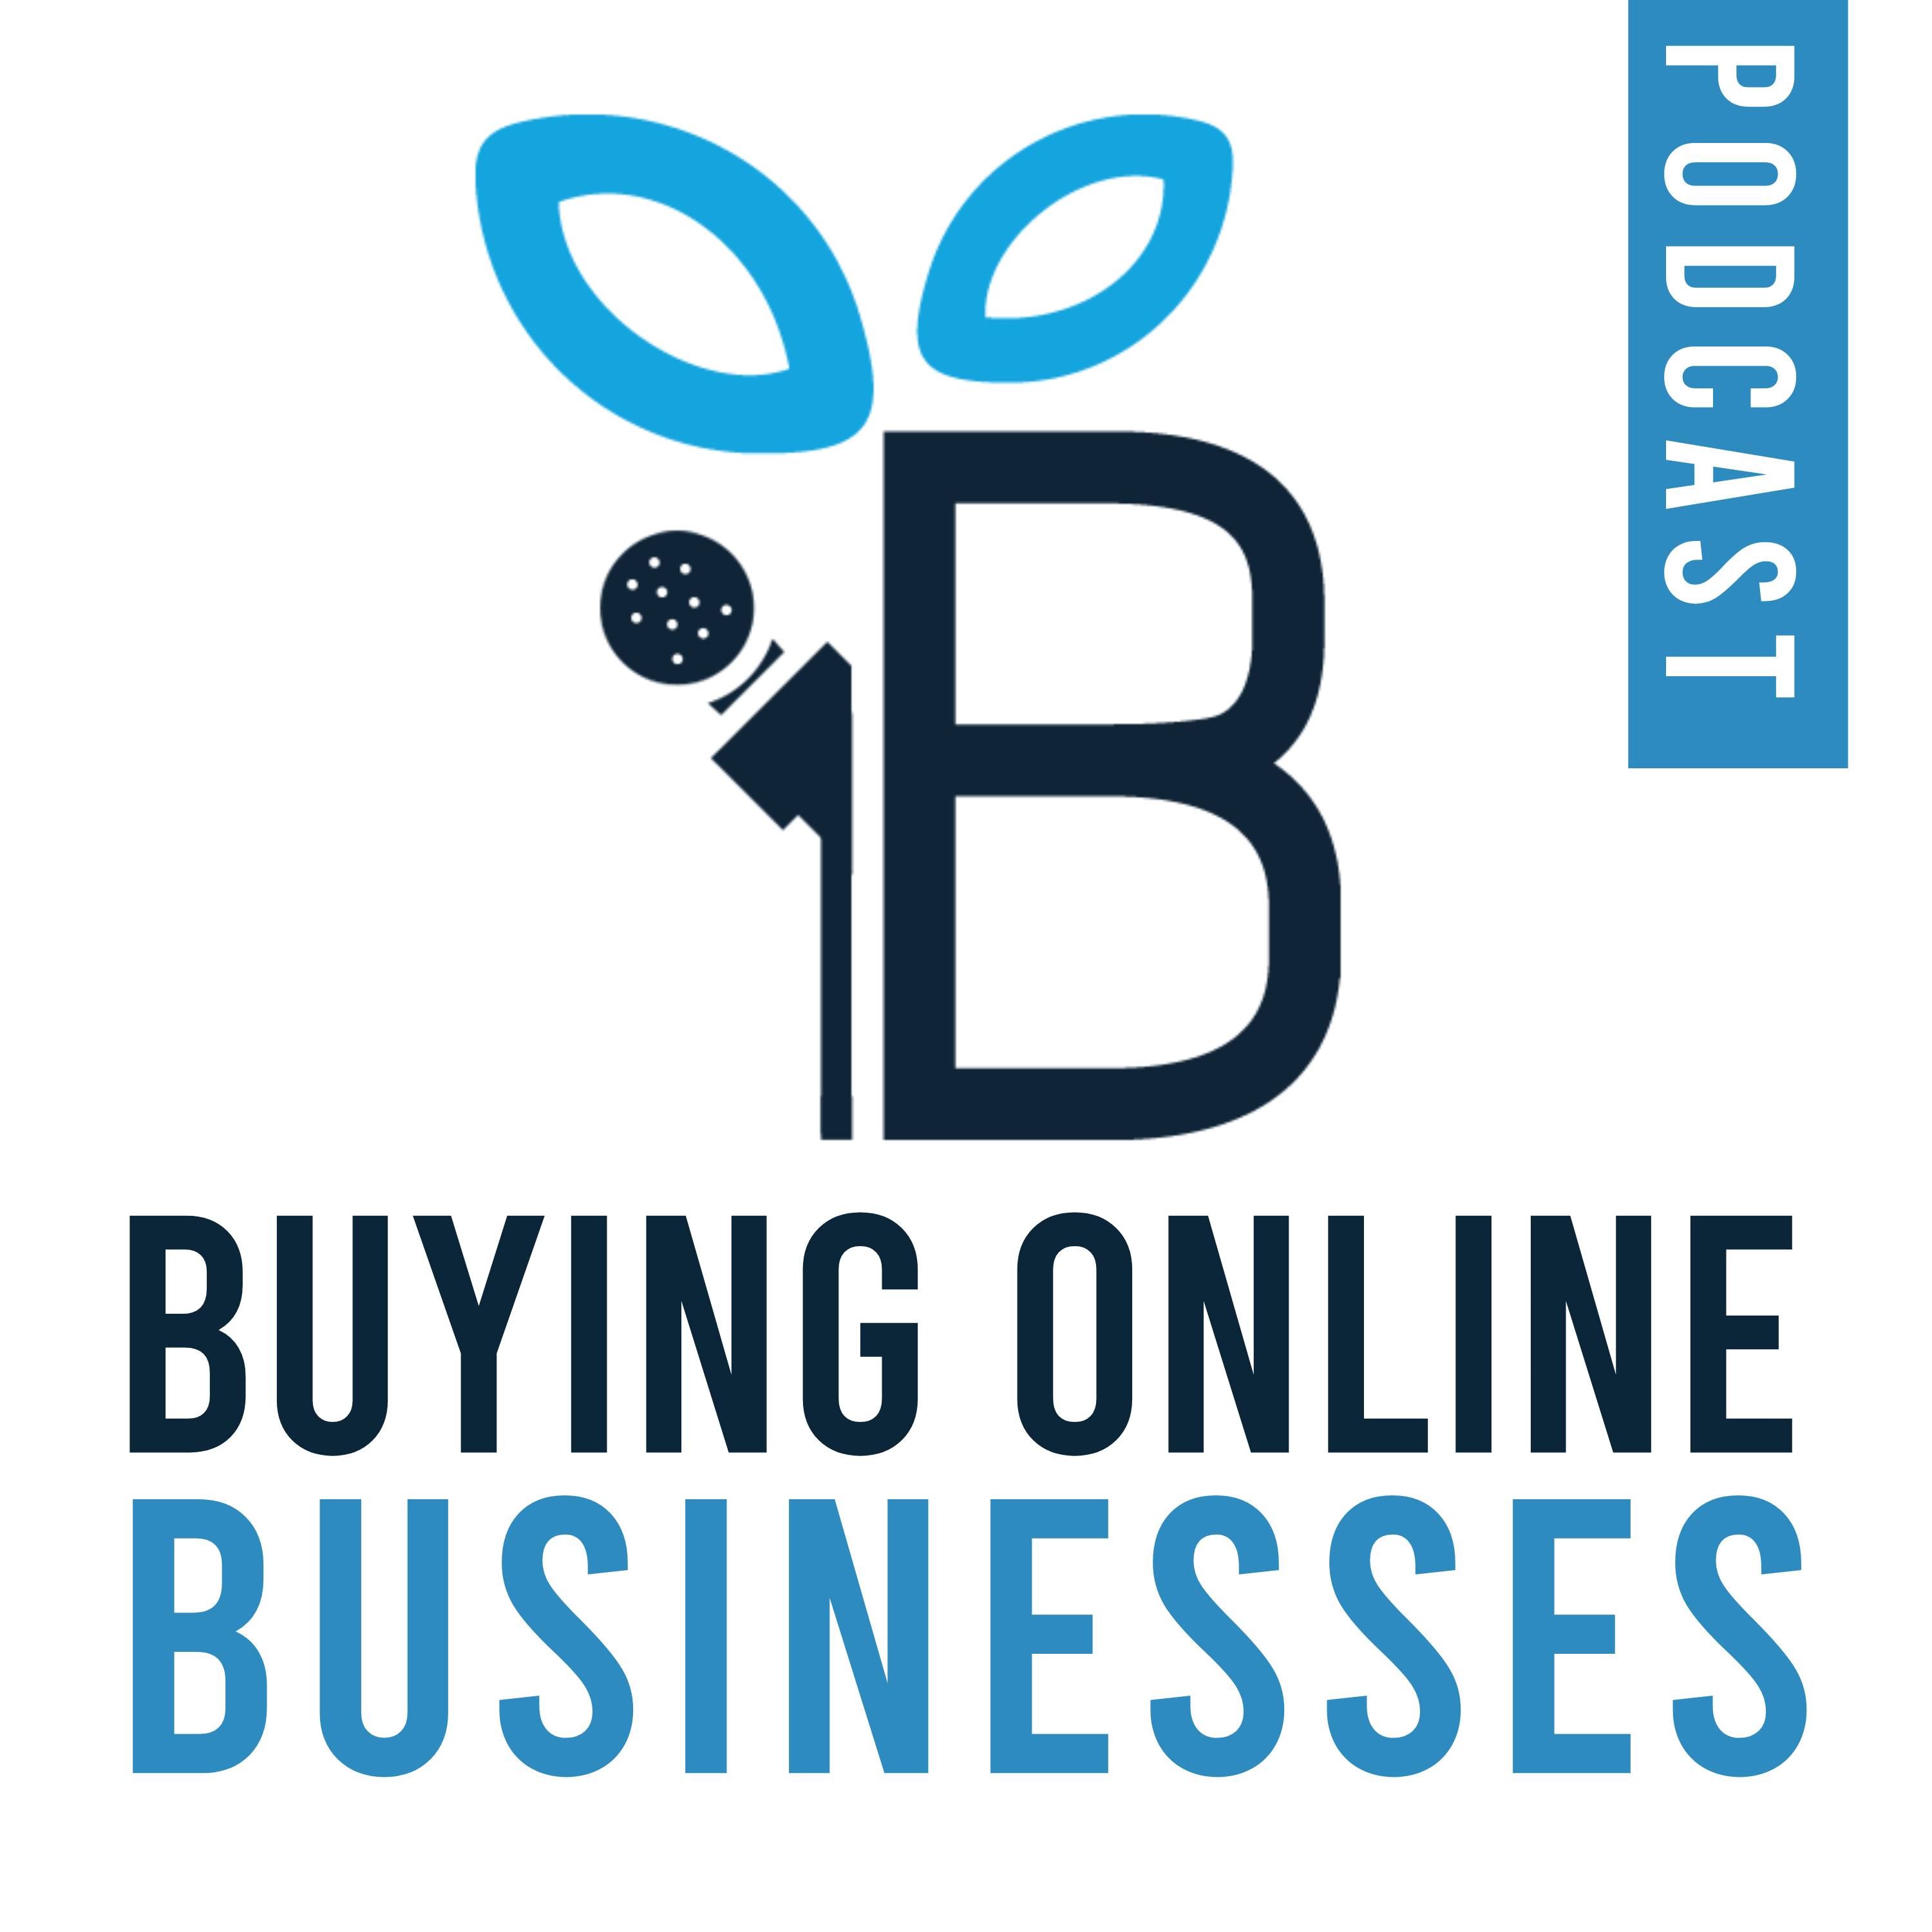 No Money Down Acquisitions - Can You Buy An Online Business With No Money?